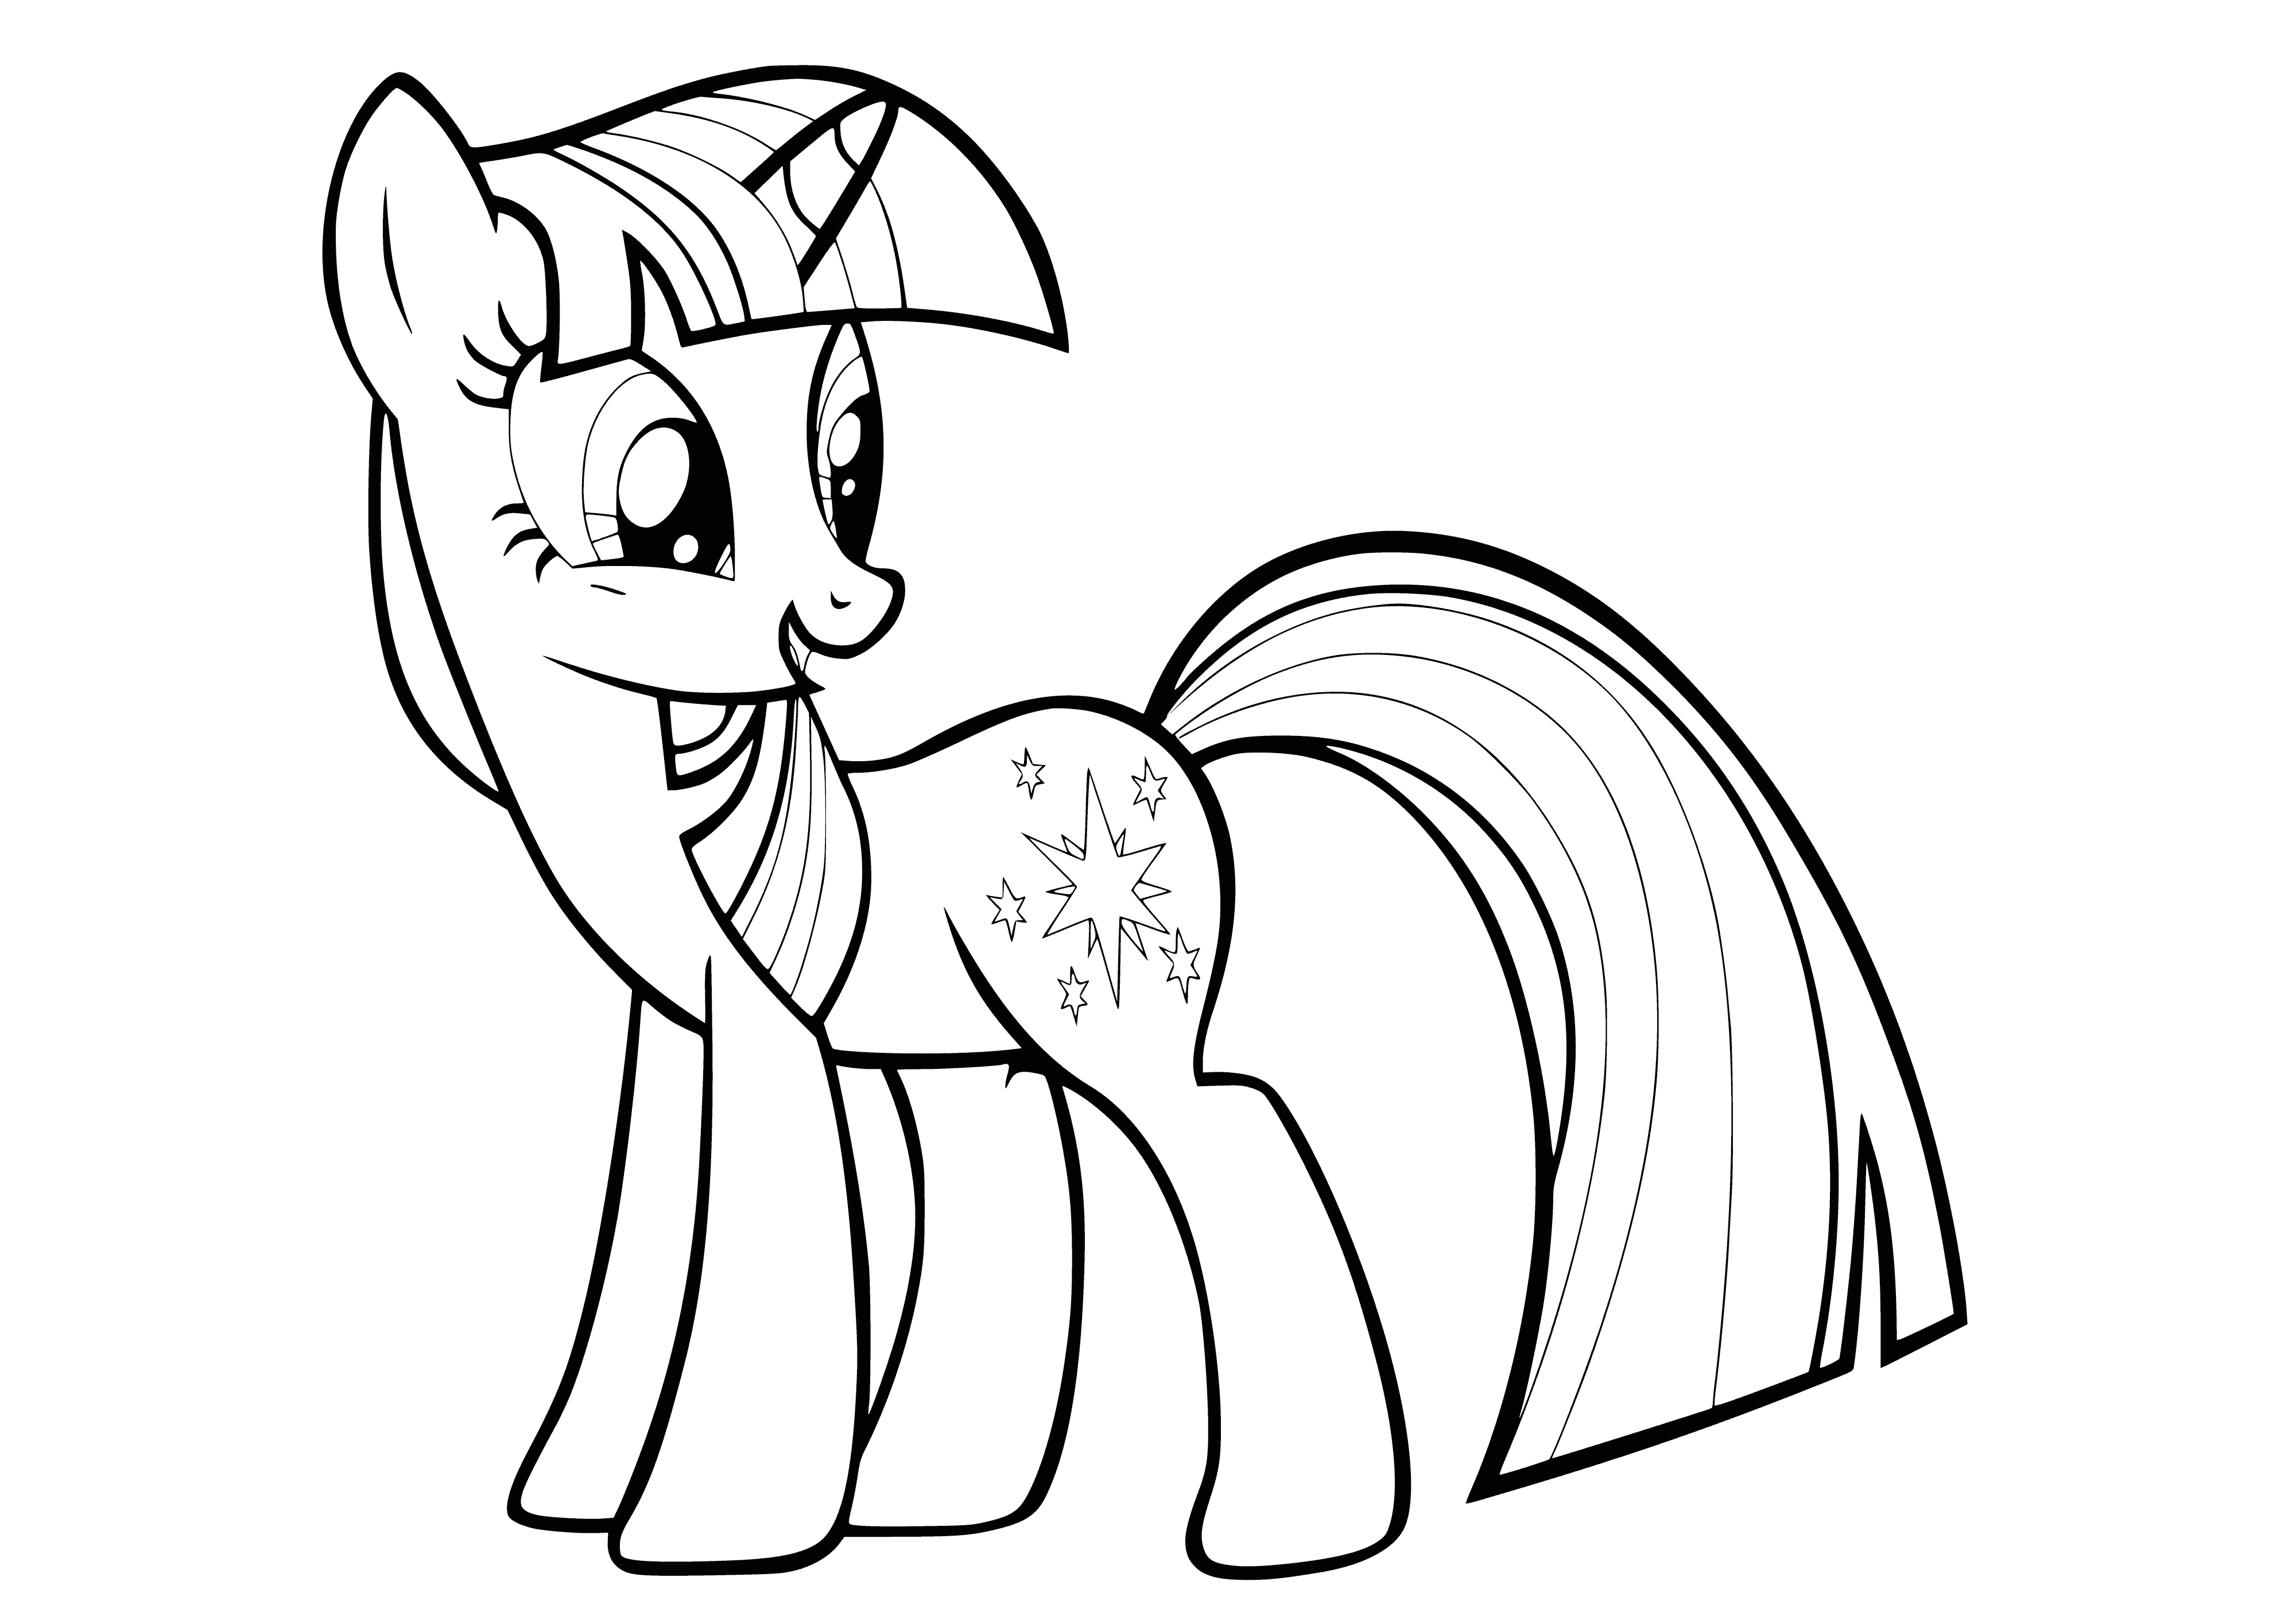 coloring page: Twilight Sparkle is a magical pink pony with a long purple mane/tail and 6-pointed star cutie mark. She is the Element of Magic.